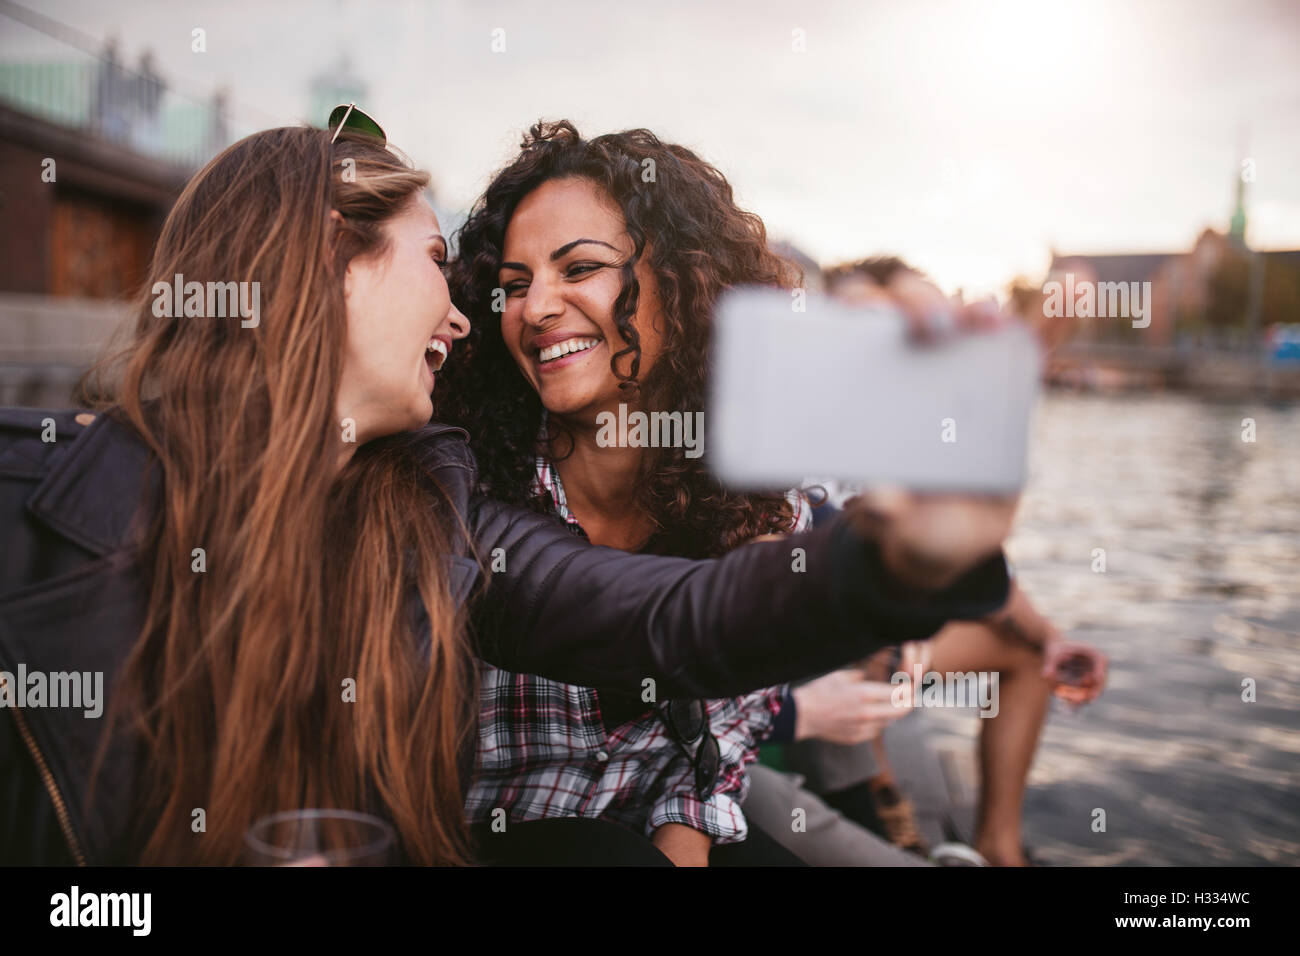 Cheerful young women friends taking selfie by the lake. Best friends having fun together. Stock Photo